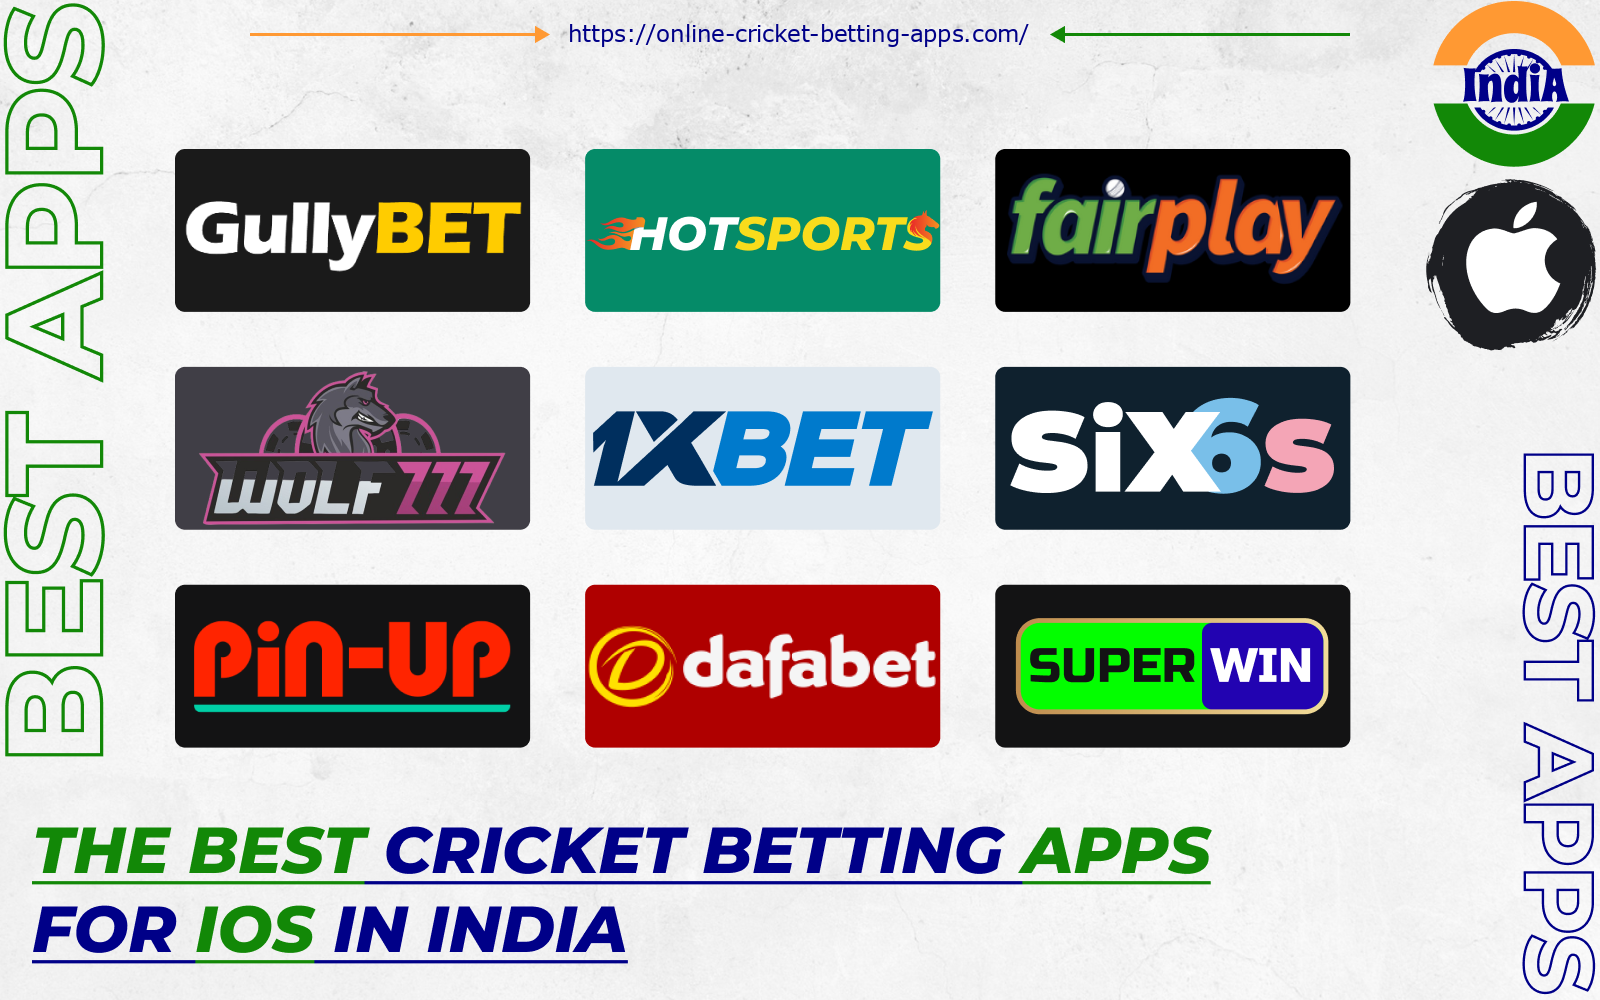 Bookmakers are releasing quality apps for iOS devices so that Indian users can comfortably bet on cricket at any time